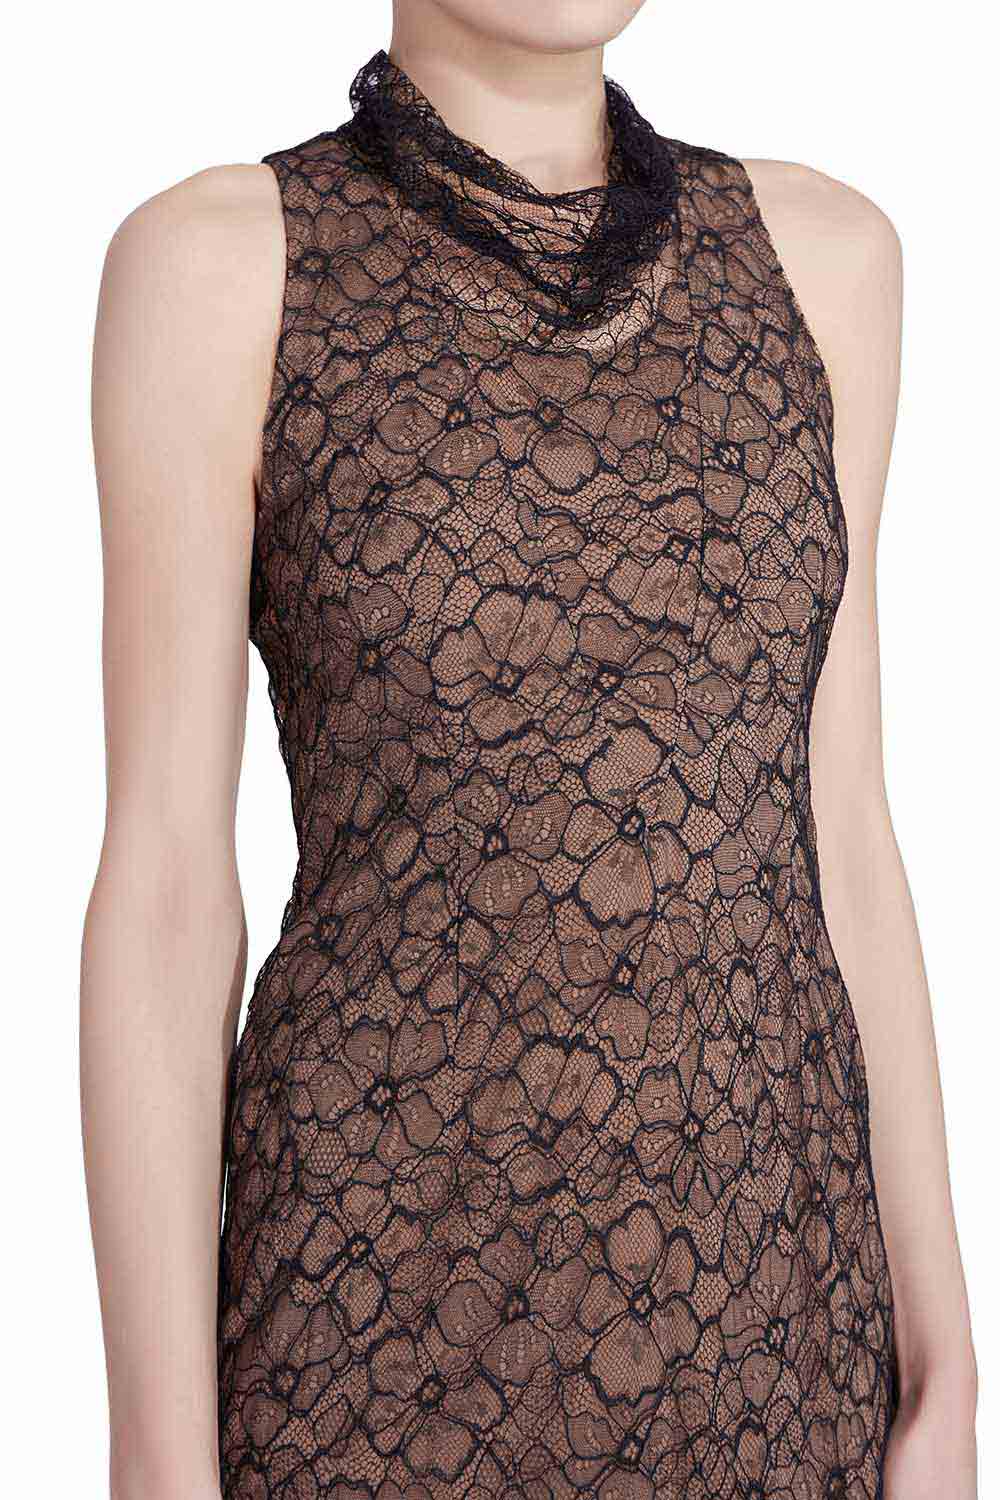 Vera Wang Collection Black Floral Lace High Cowl Neck Sleeveless Dress S